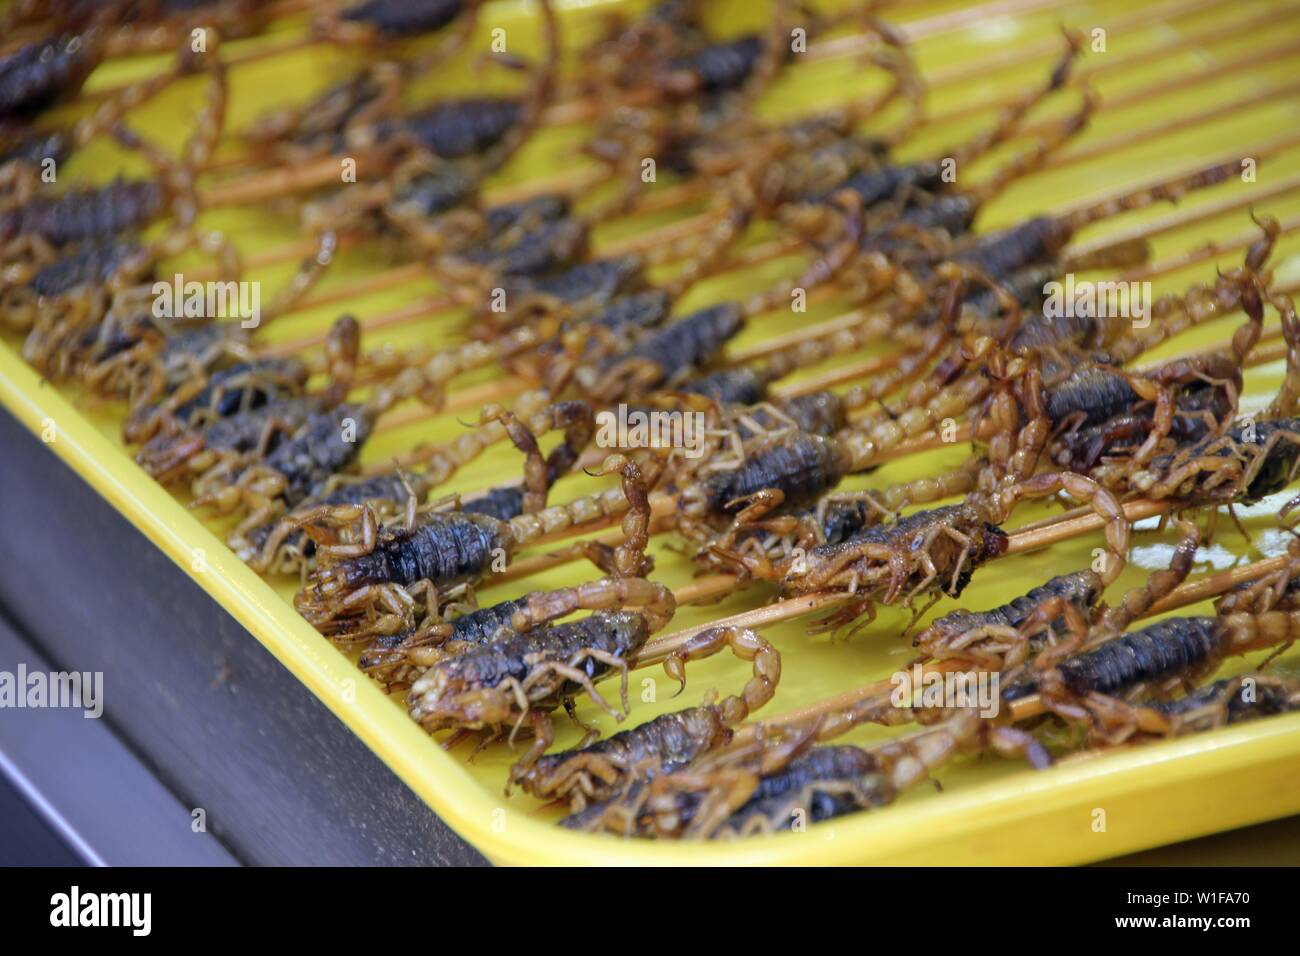 fresh streetfood with fried scorpions Stock Photo